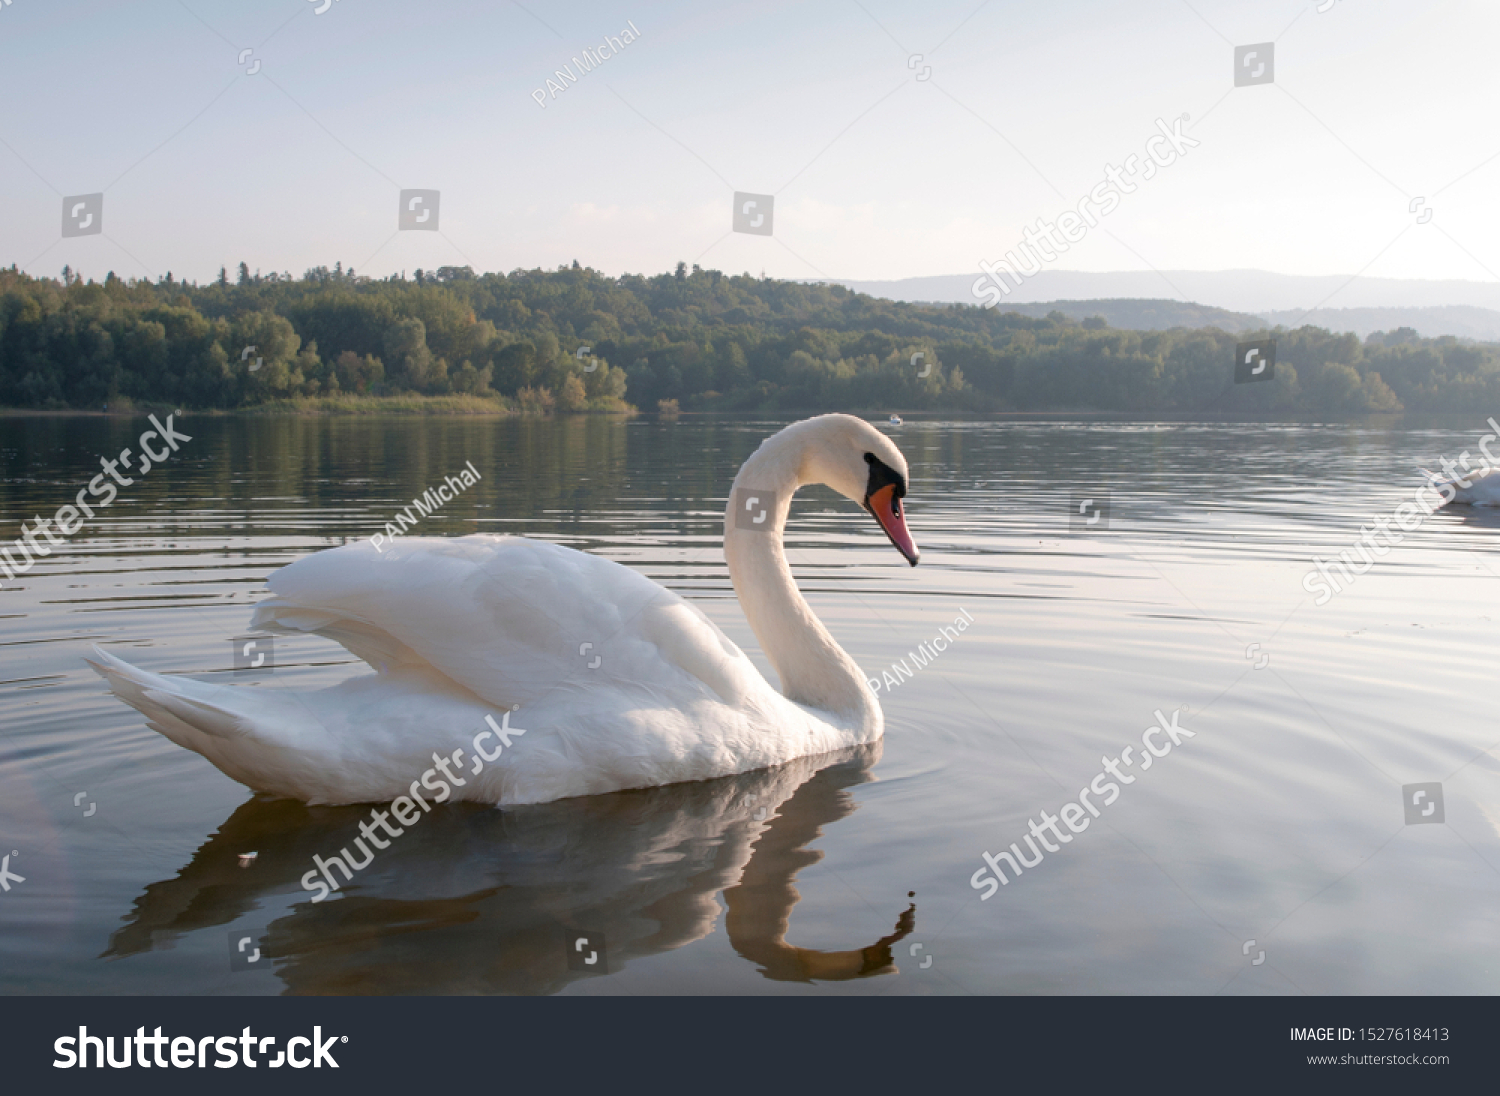 white swans with small swans on the lake #1527618413